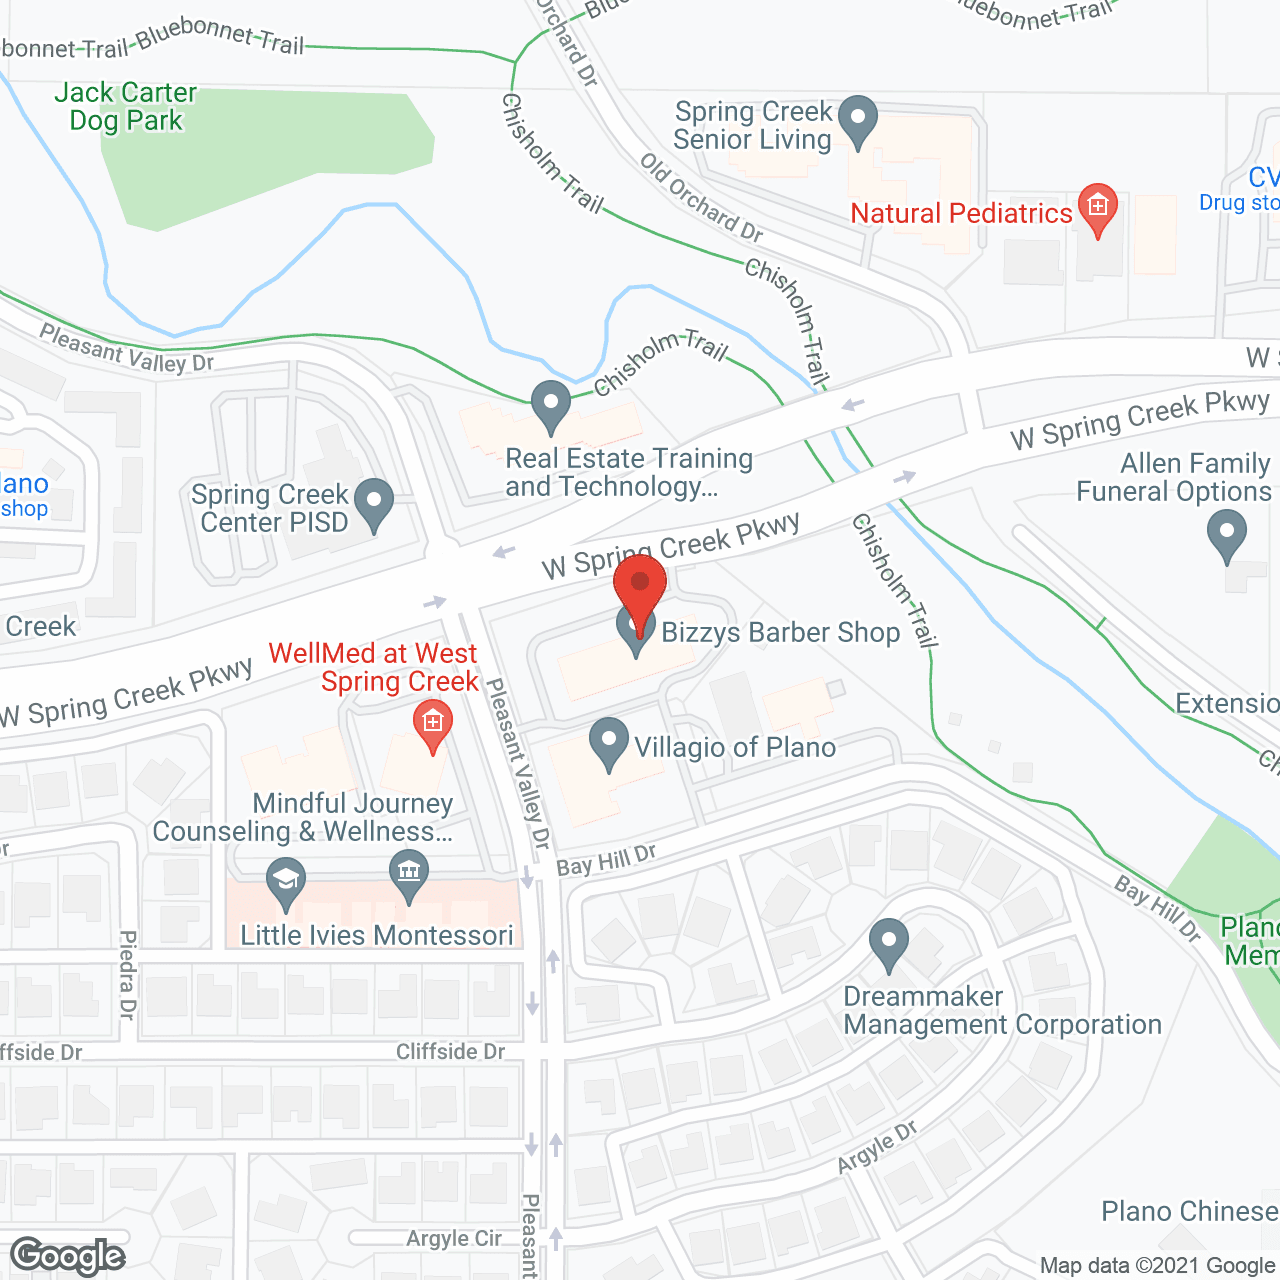 Arms of Hope in google map